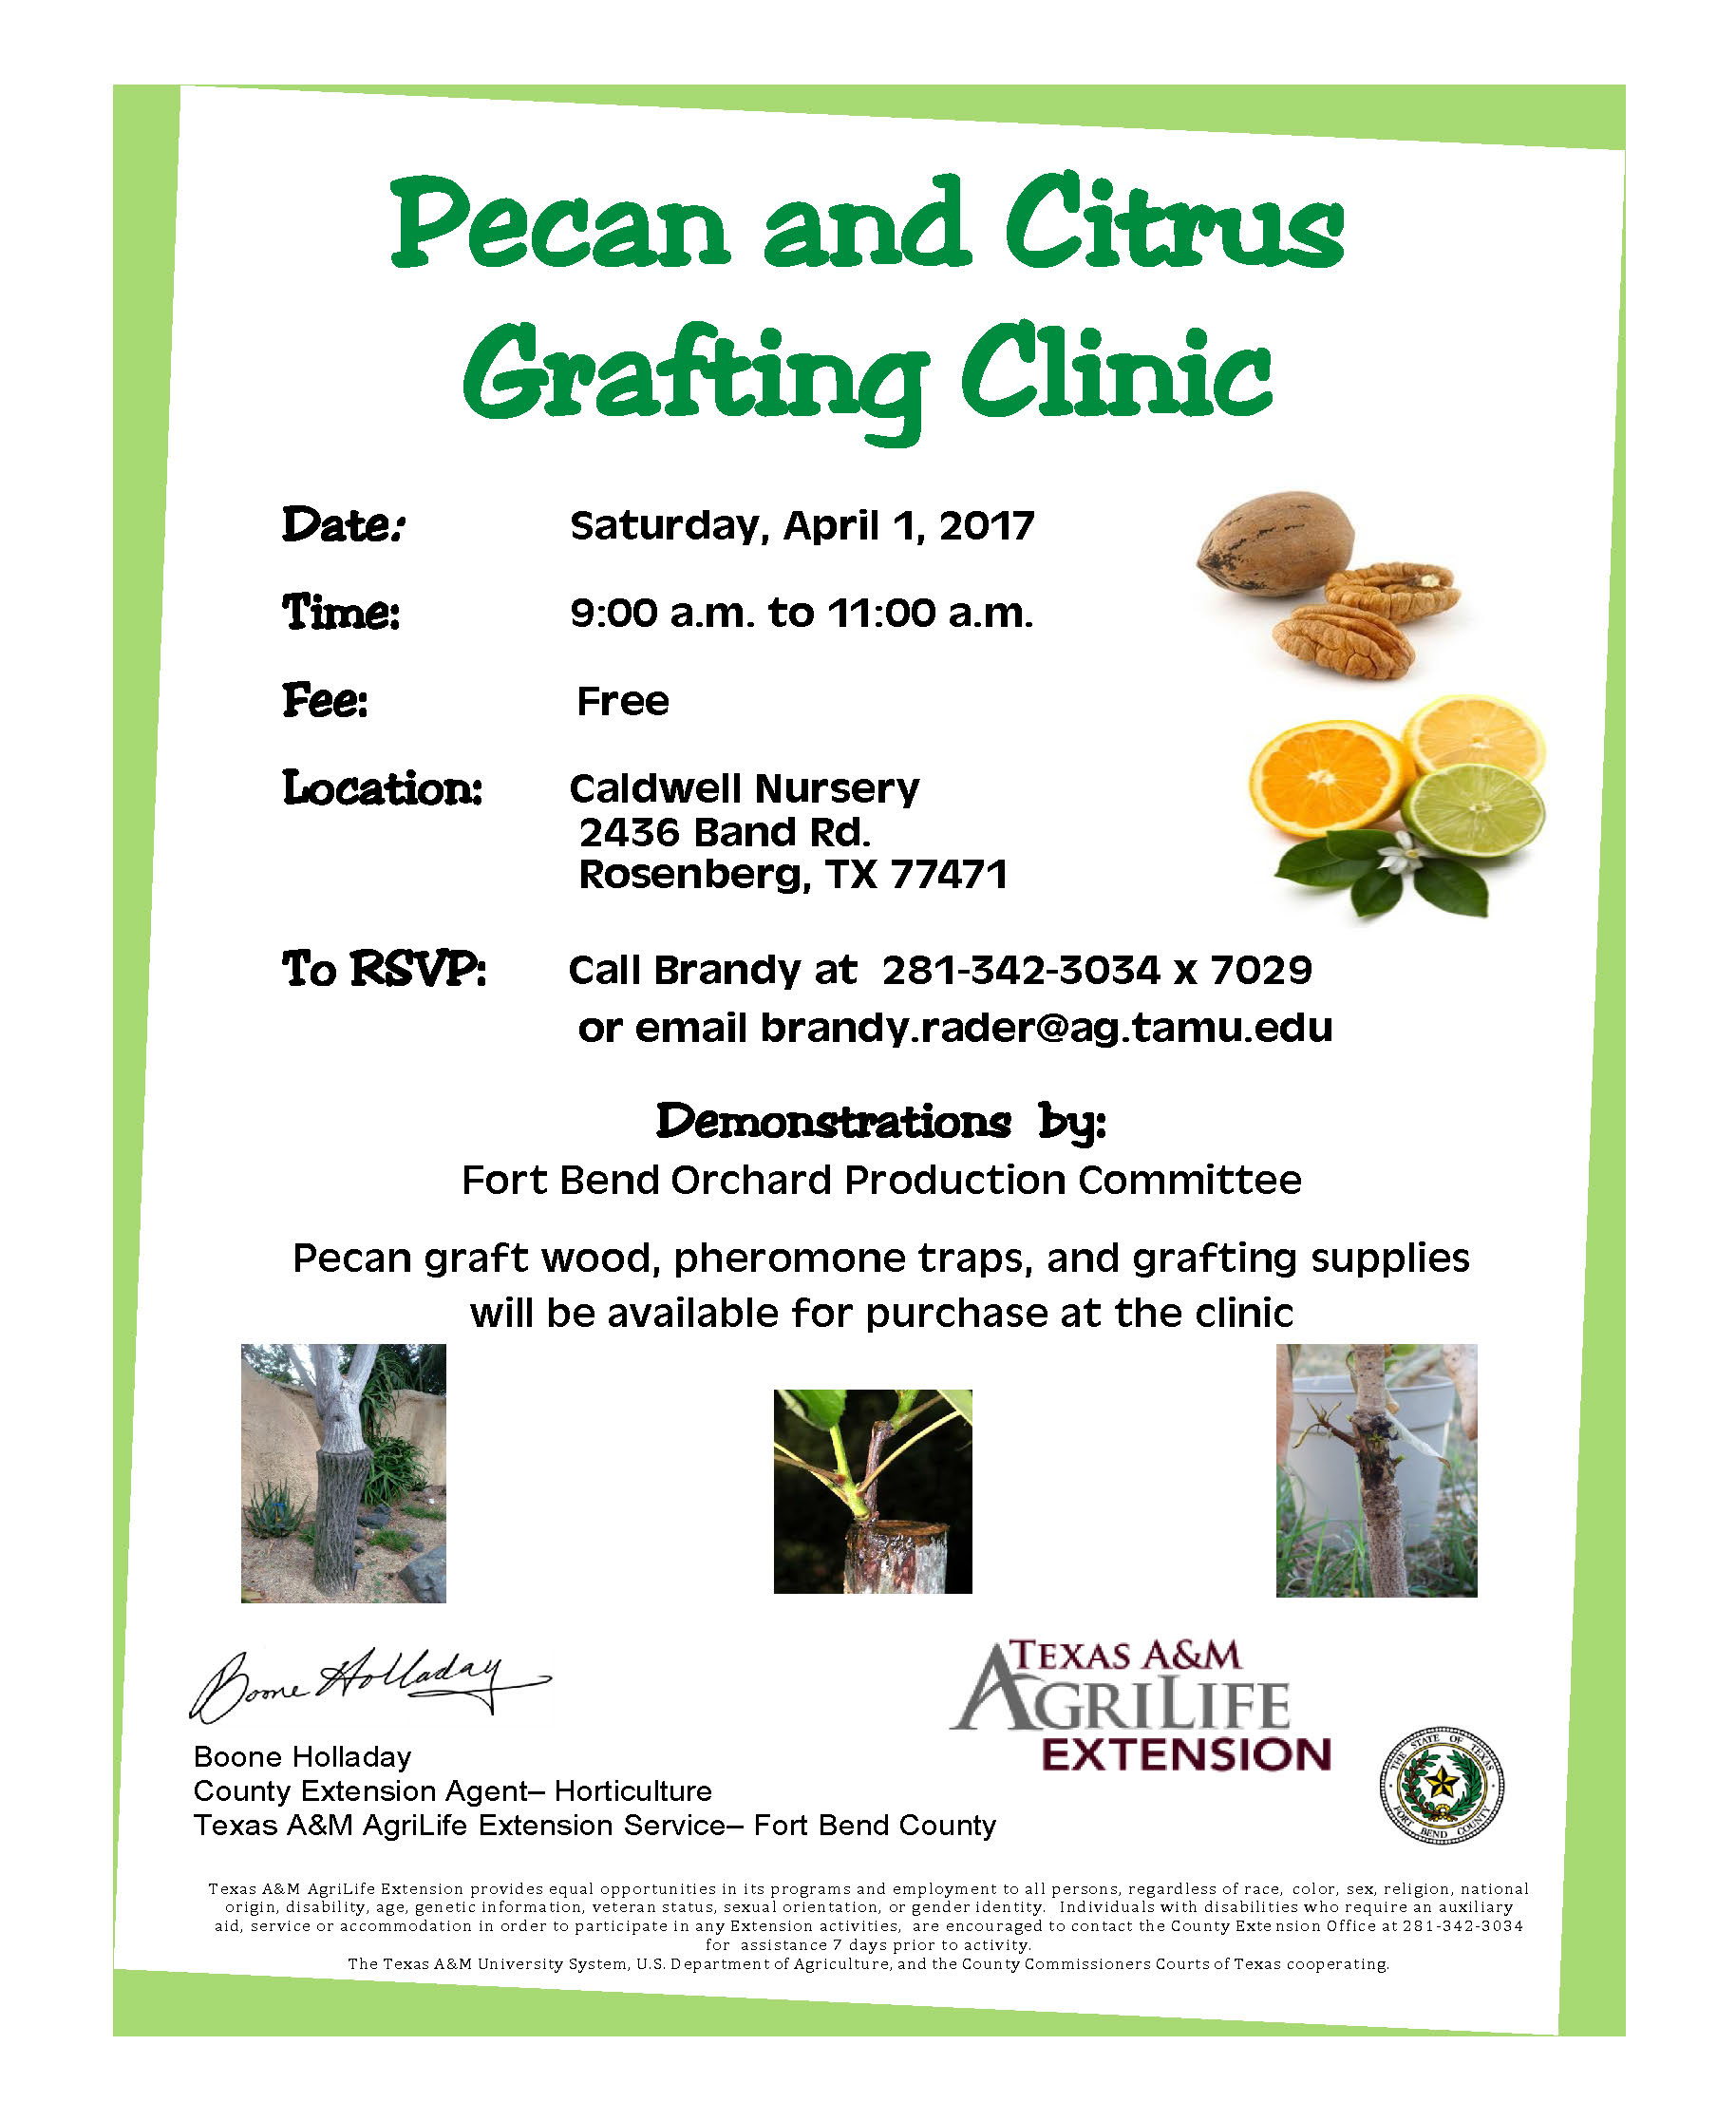 Pecan and Citrus Grafting Clinic1828 x 2233